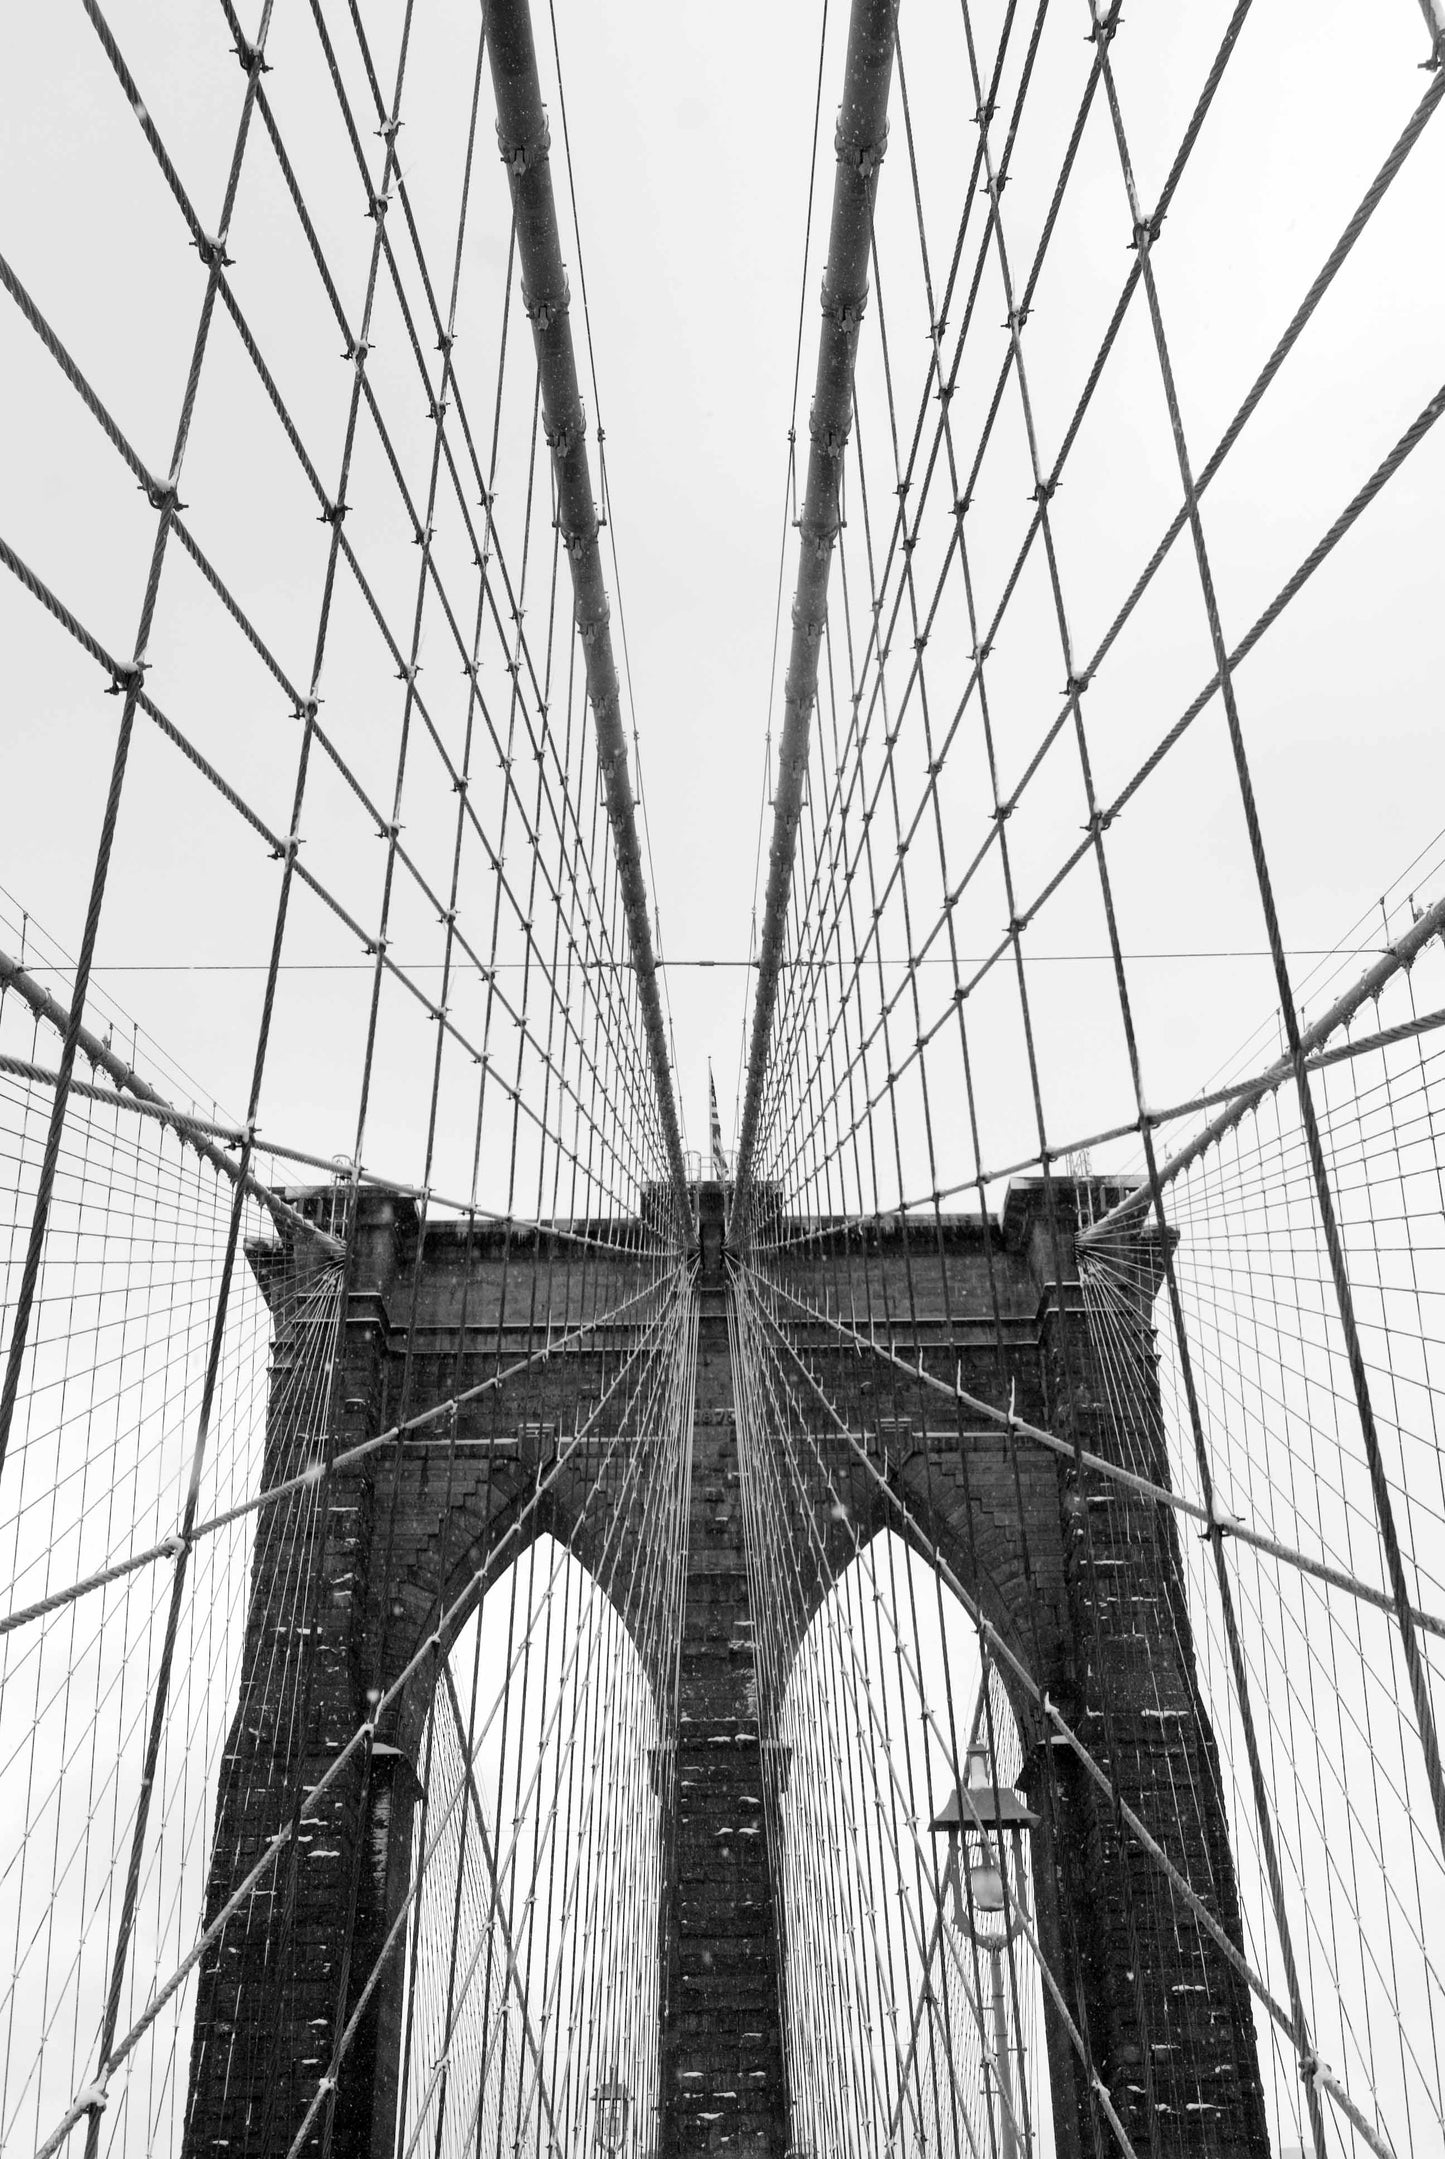 Revealing the geometry and architecture of one of New Yorks most famous landmarks, the Brooklyn Bridge